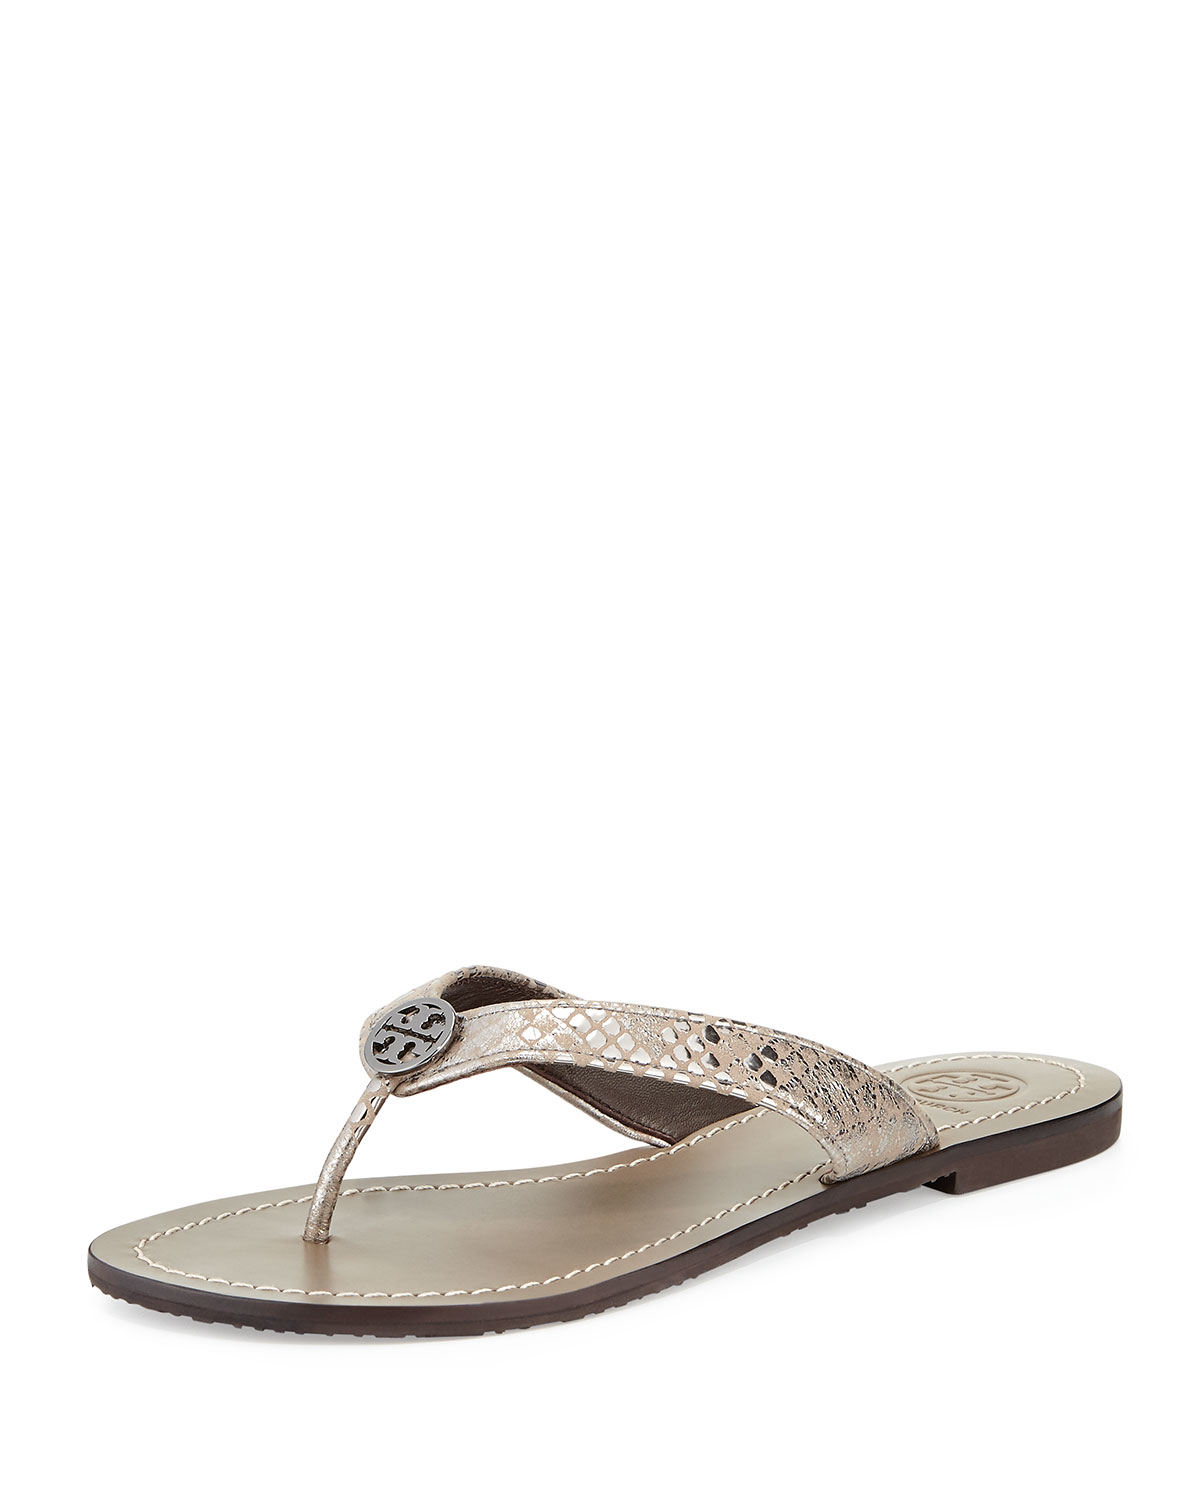 Burch thora sandals - 28 images - new burch thora leather 